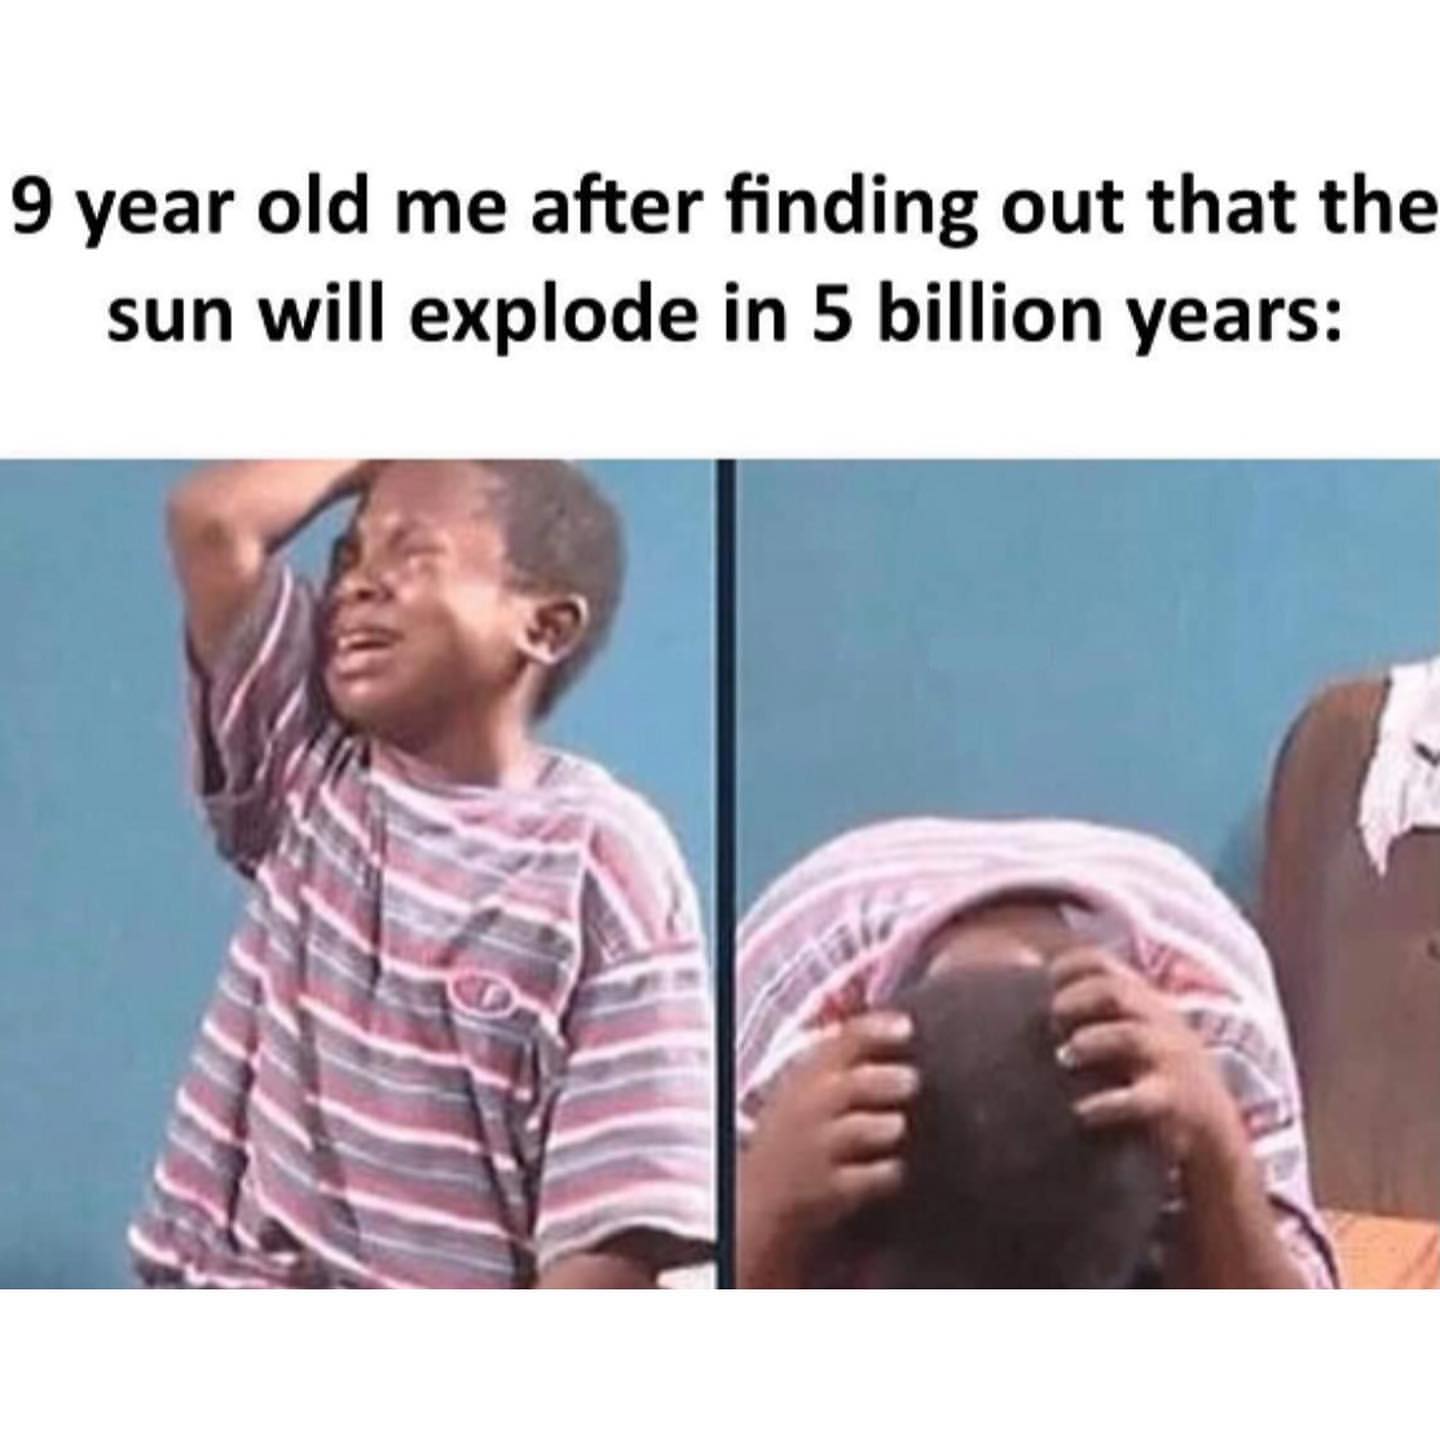 9 year old me after finding out that the sun will explode in 5 billion years.